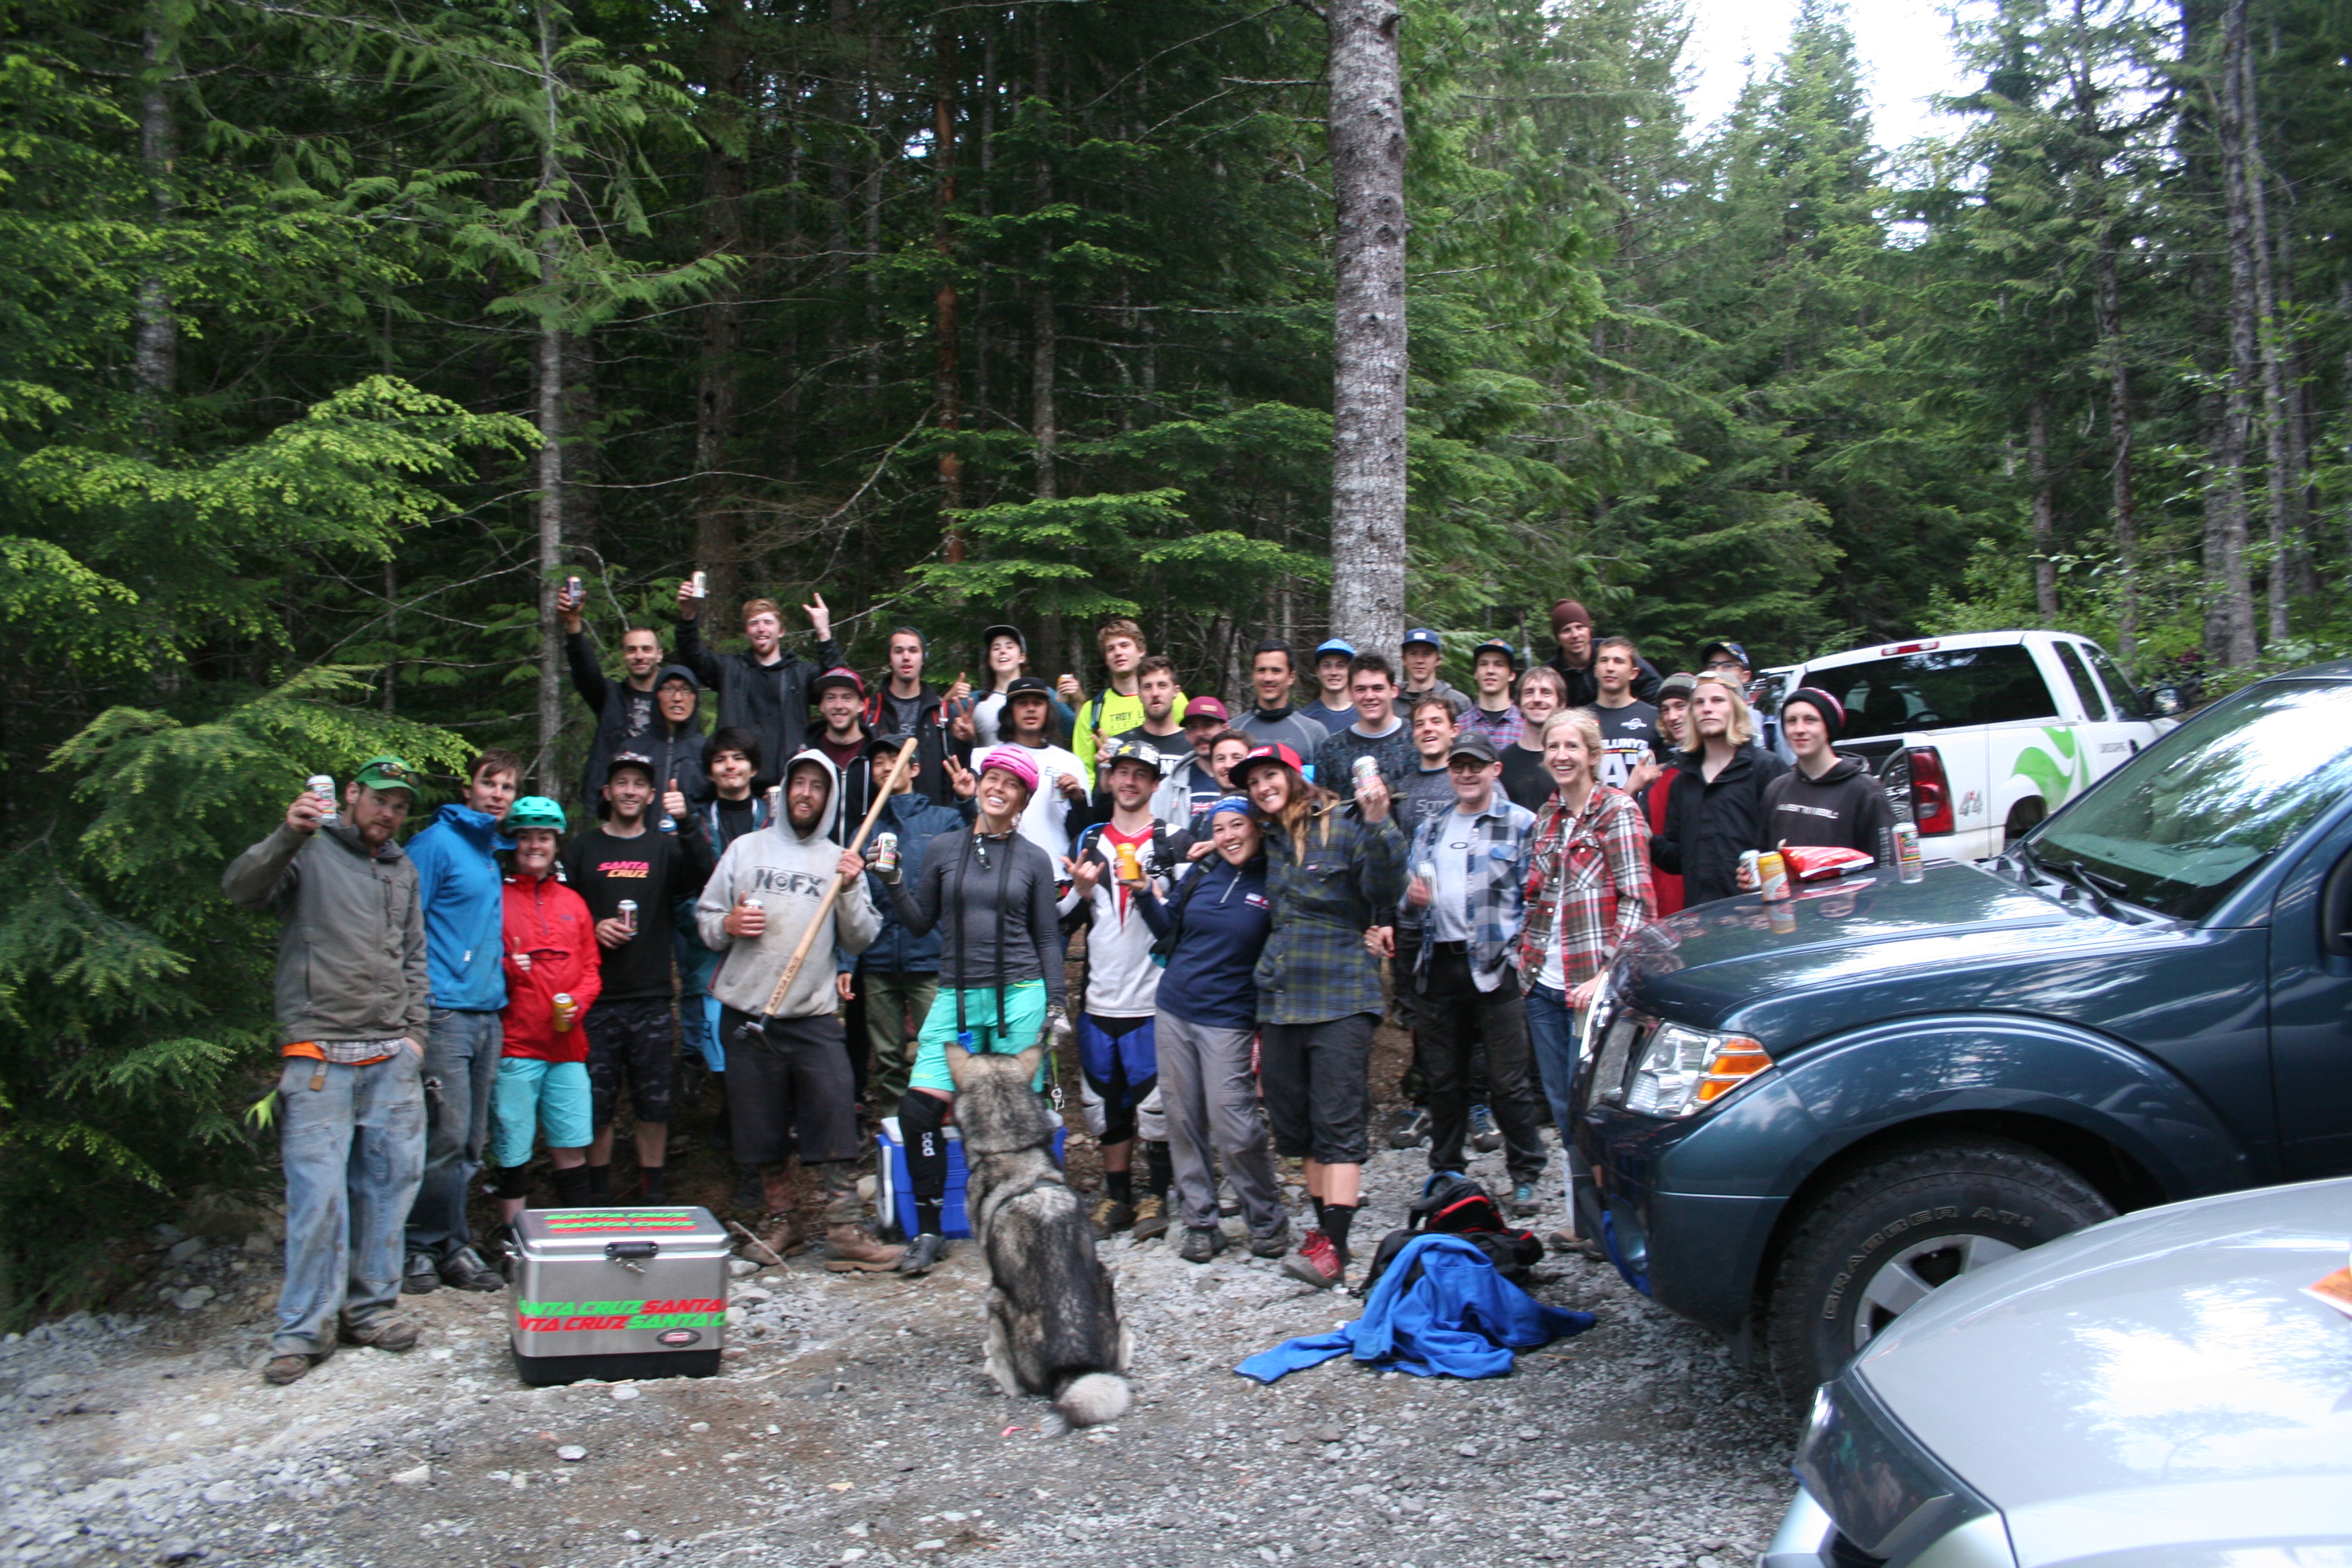 Group photo of all the WORCA volunteers and a few beers. Good times!